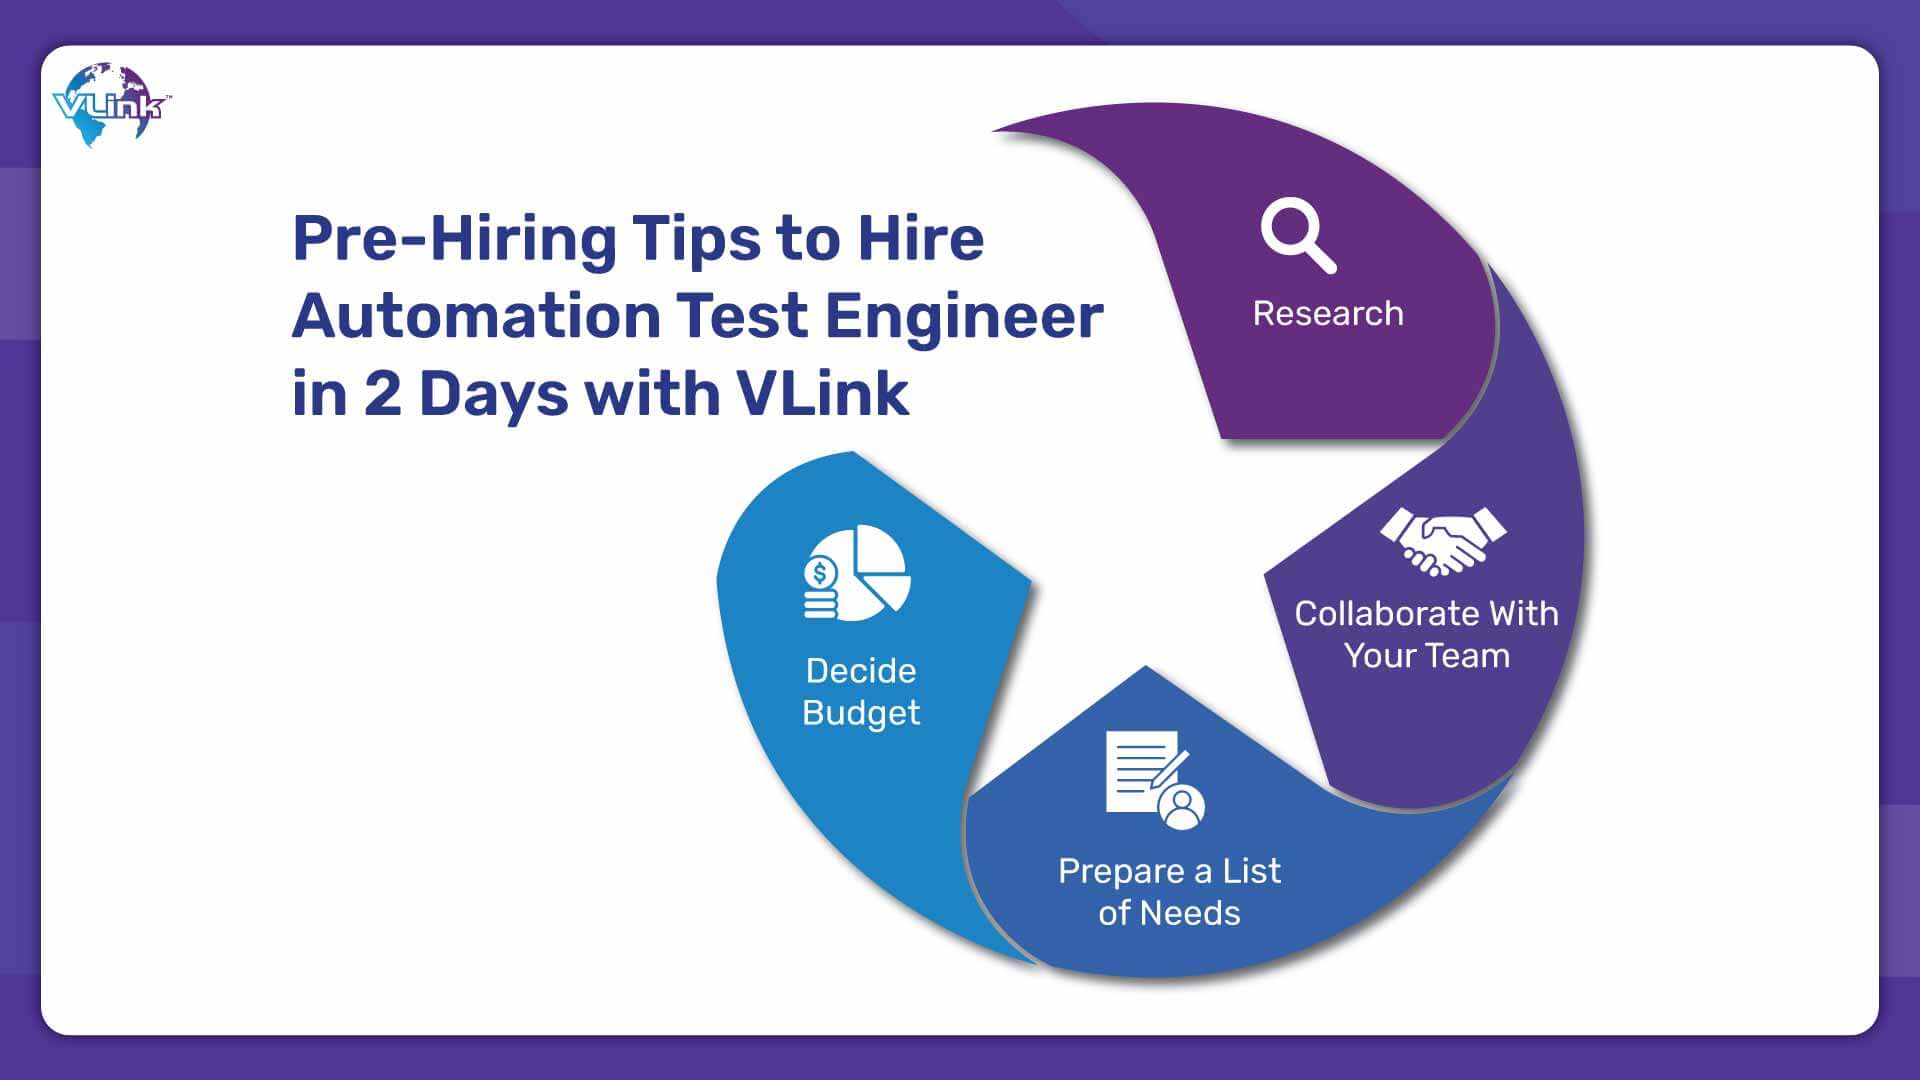 Pre-Hiring Tips to Hire Automation Test Engineer in 2 Days with VLink